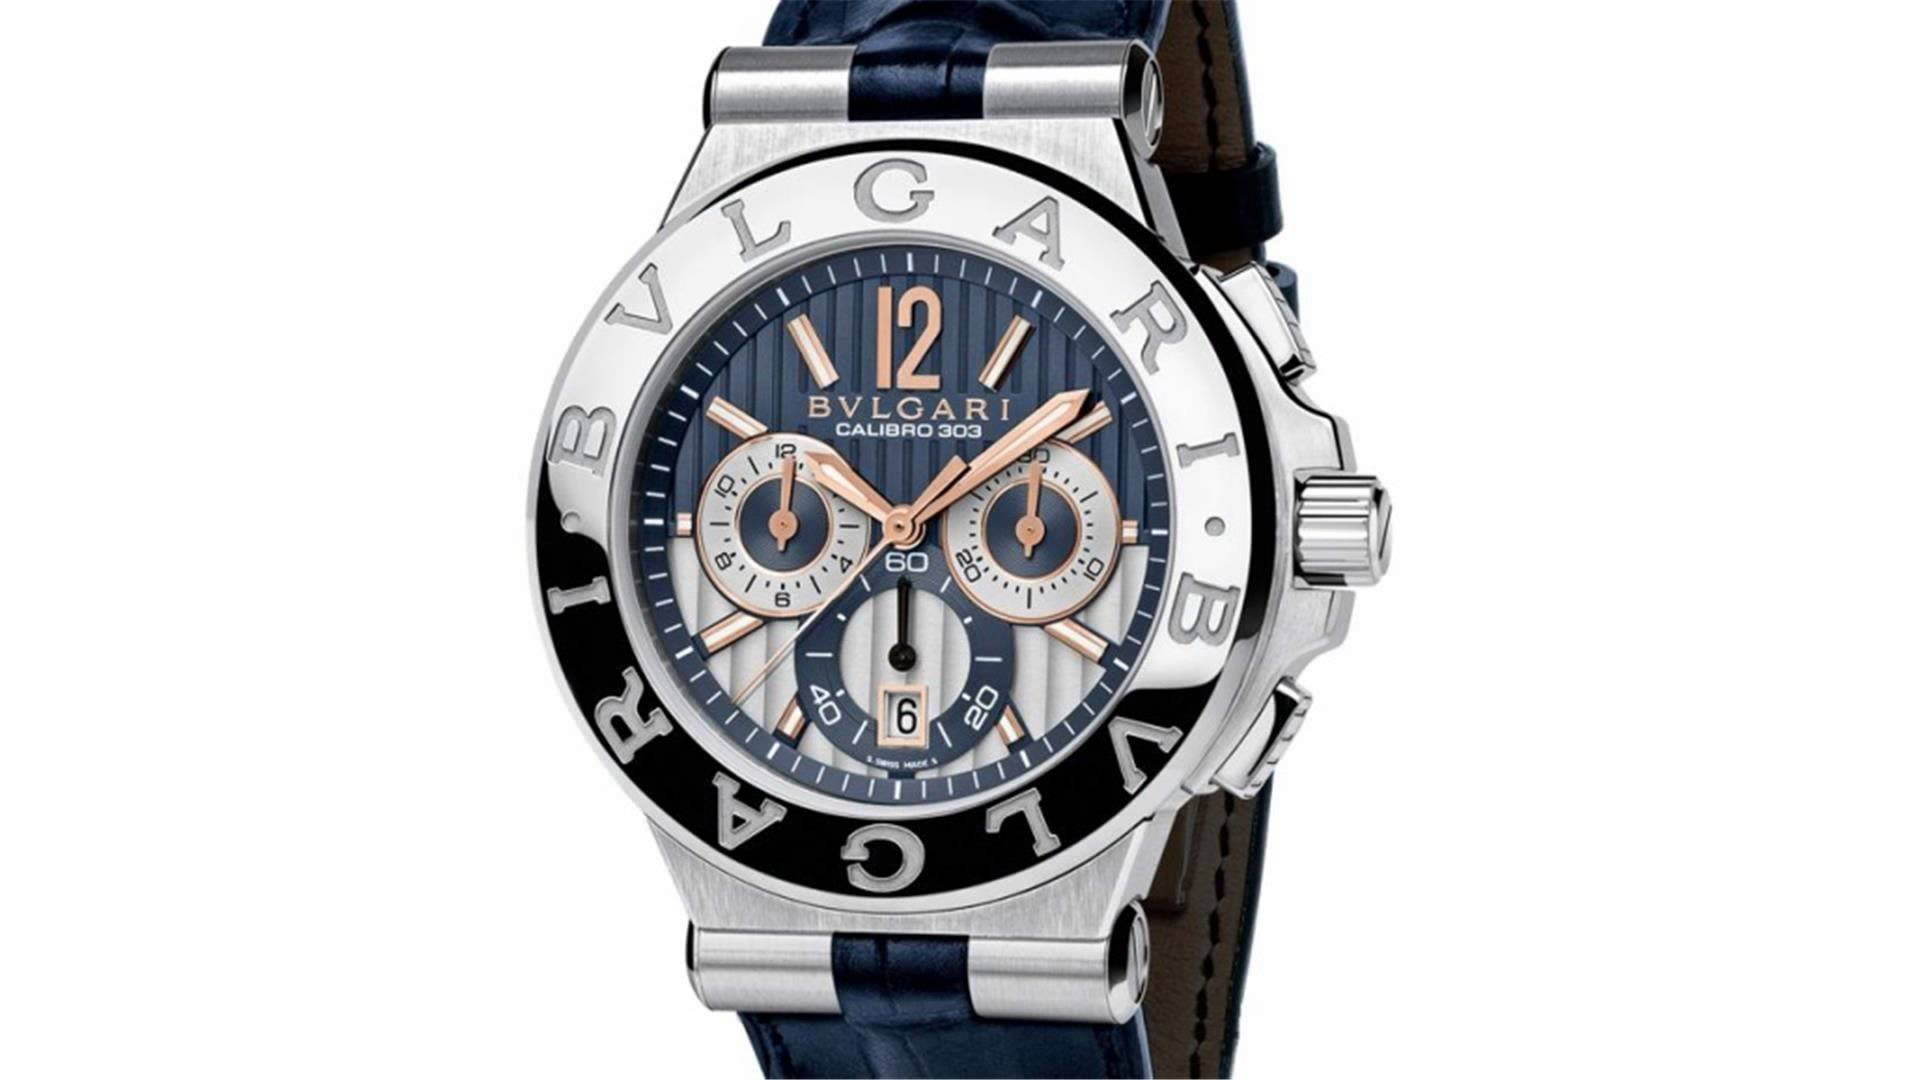 Silver And Blue Bvlgari Watch Wallpaper